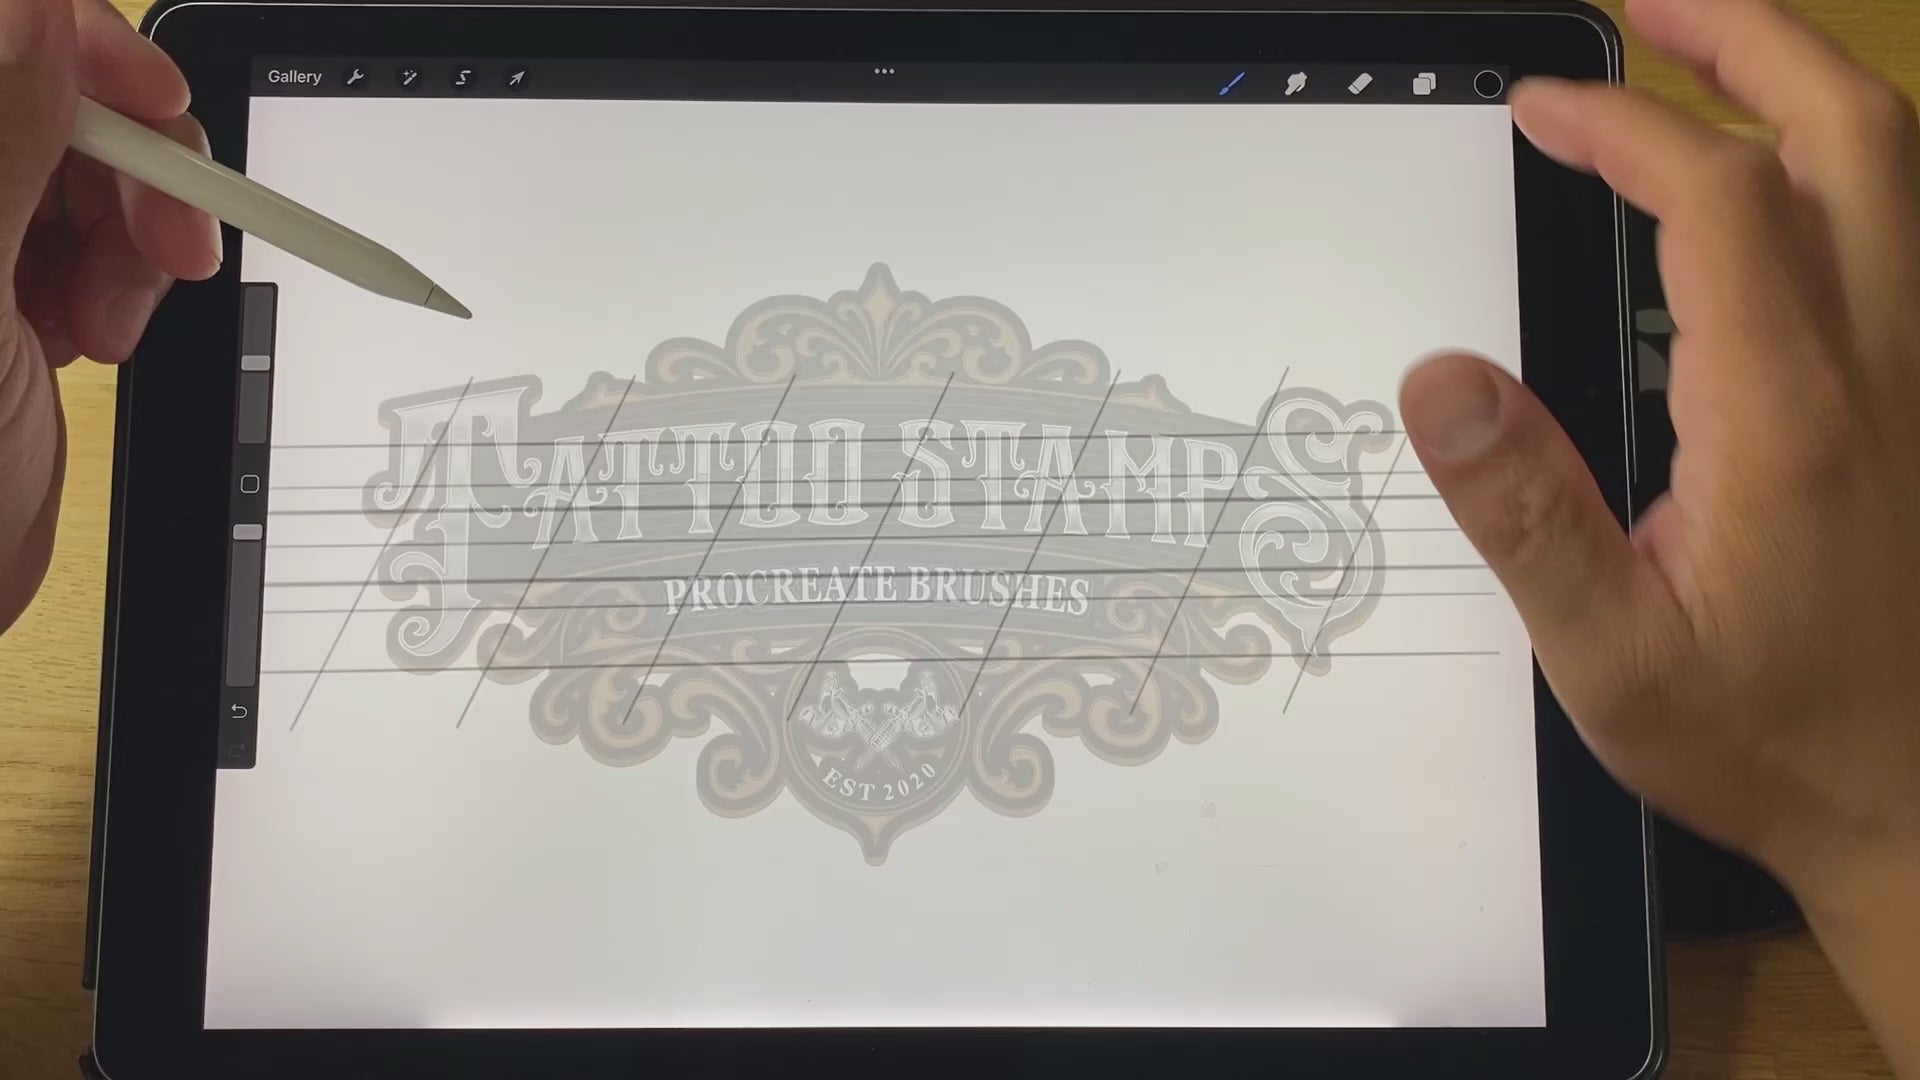 634 Chicano Lettering Tattoo Brushes Pack Volume 2 for Procreate  application on iPad and iPad pro – Brushestock